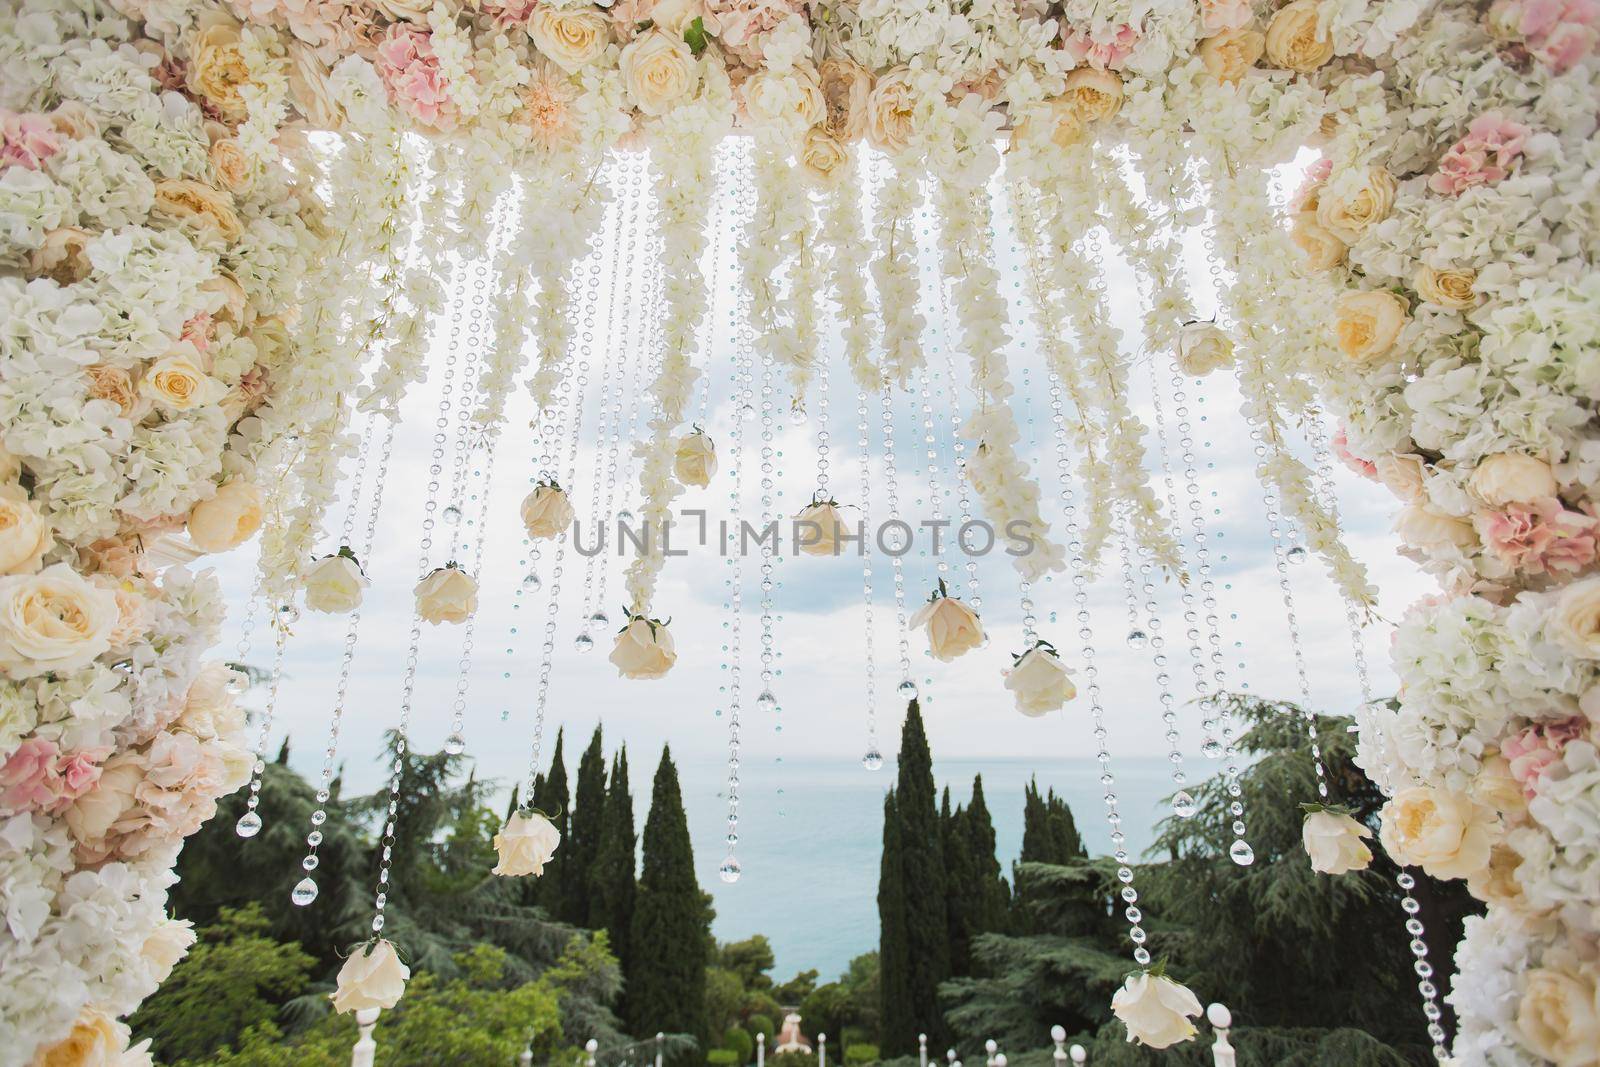 Wedding arch with flowers and beads on blue sky background close-up by StudioPeace